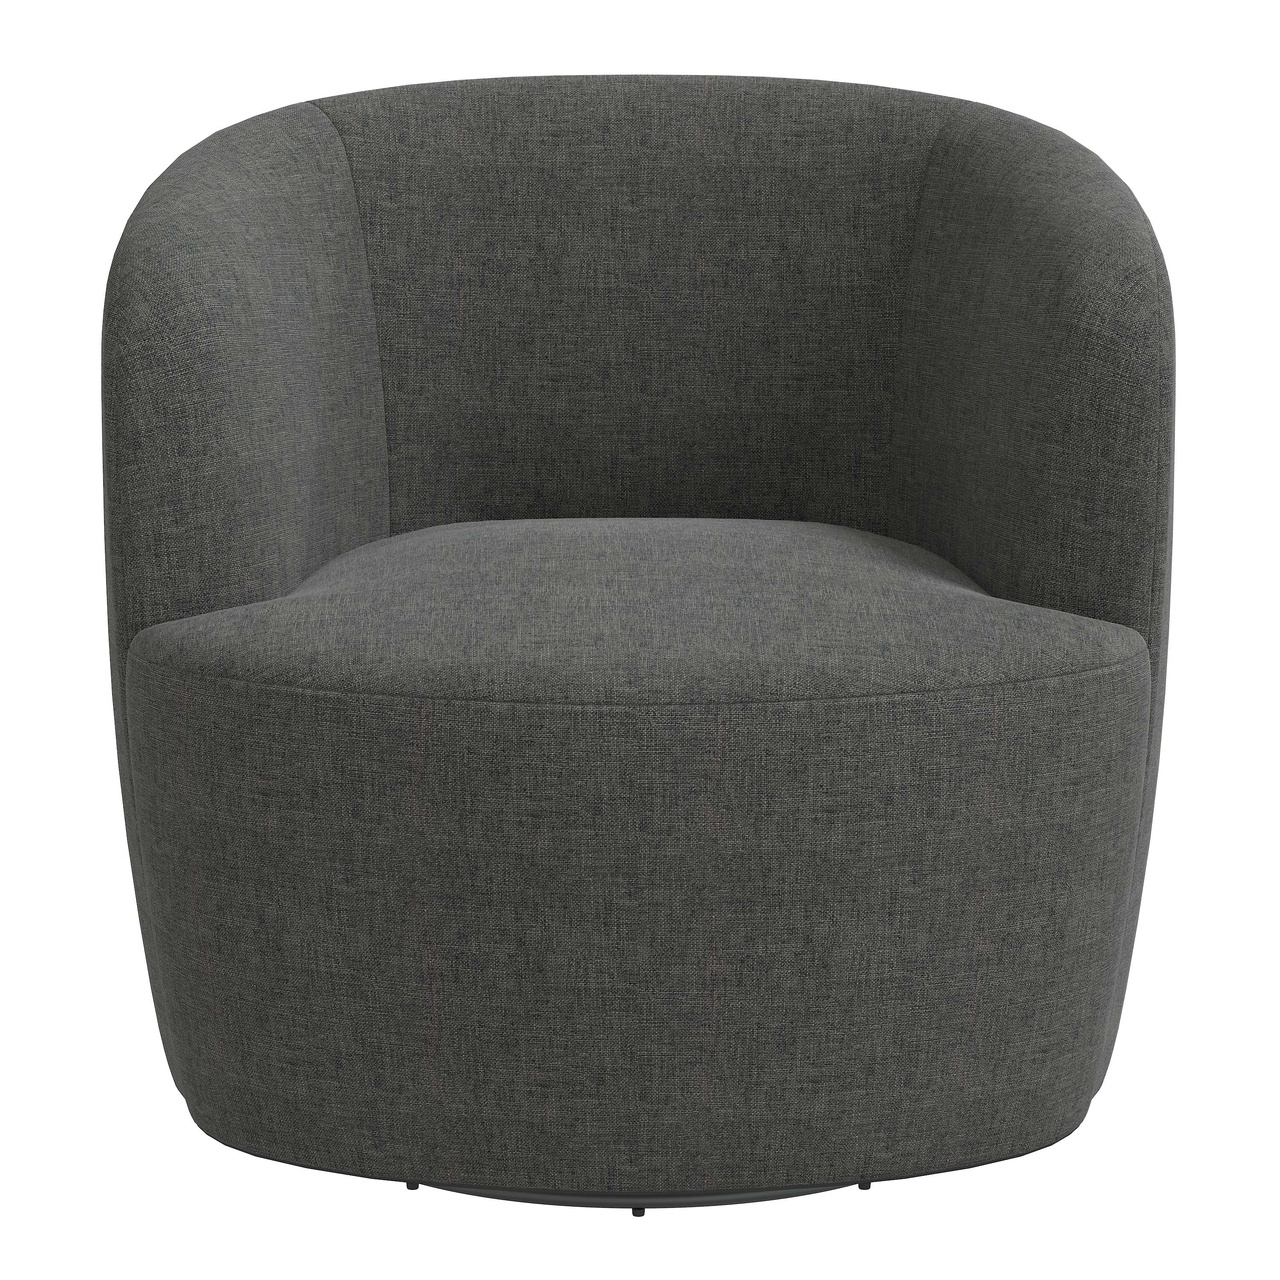 Collette Swivel Chair - Image 1